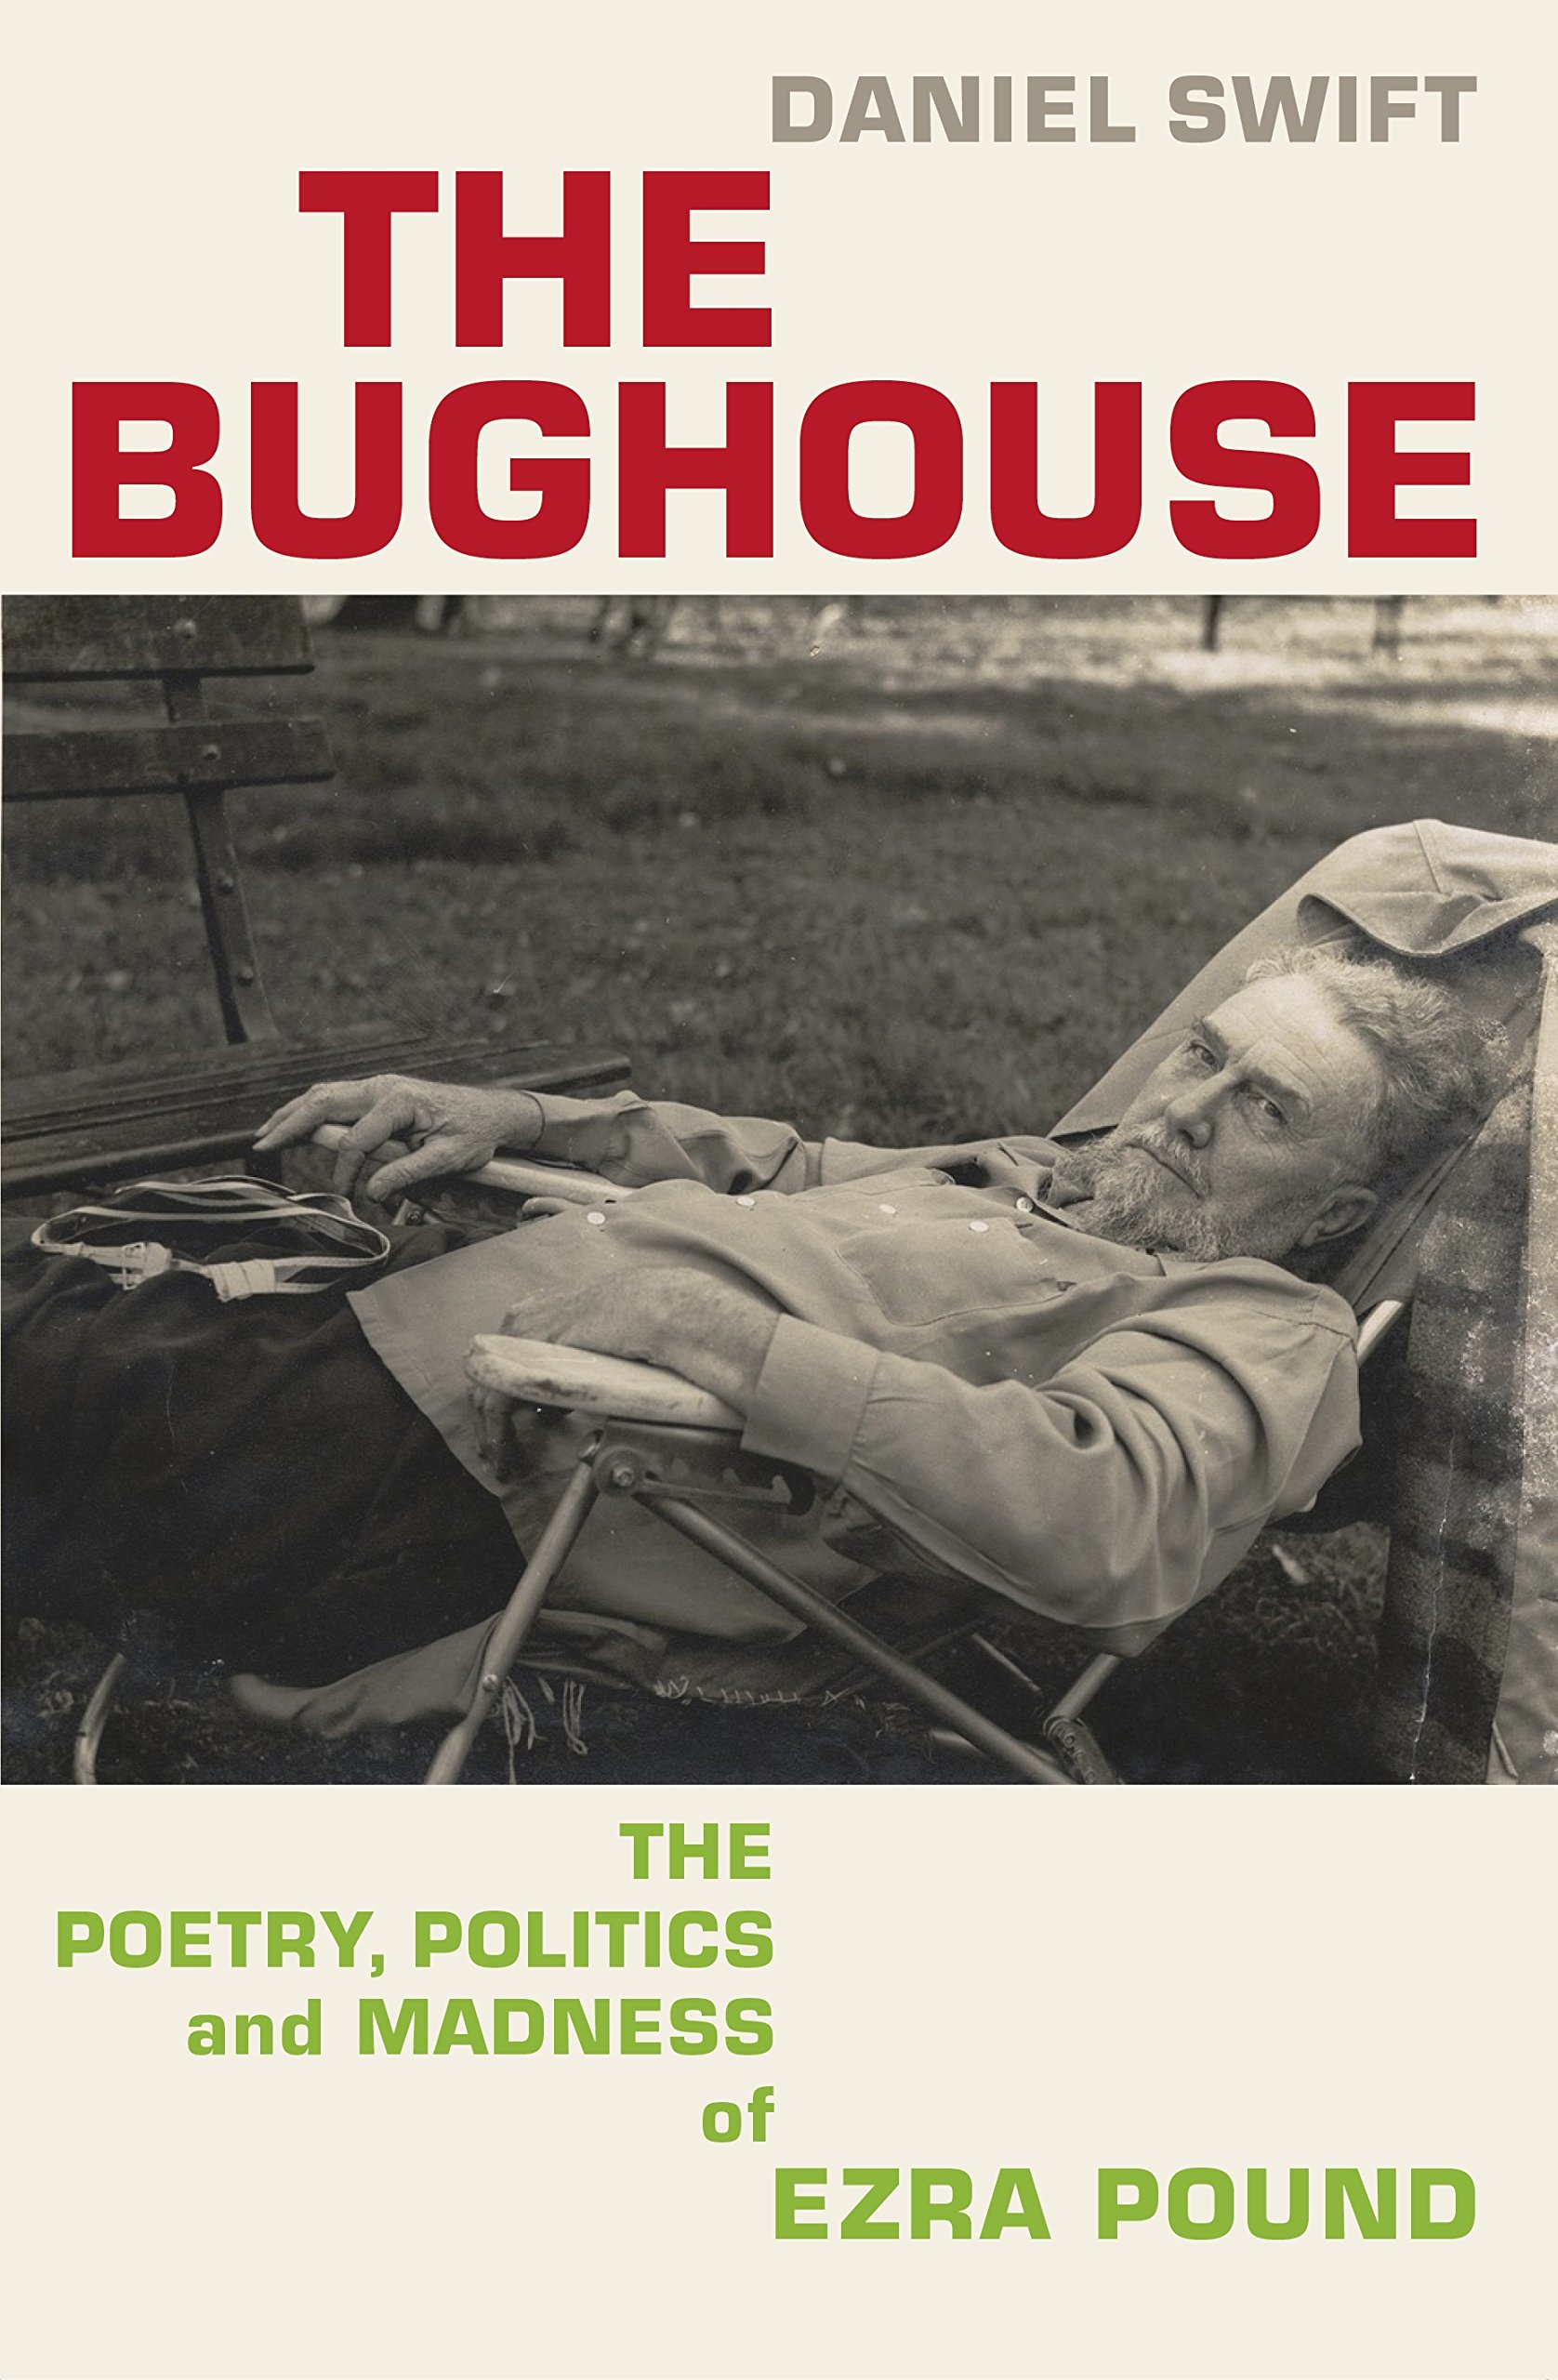 The Bughouse - The poetry, politics and madness of Ezra Pound | Daniel Swift